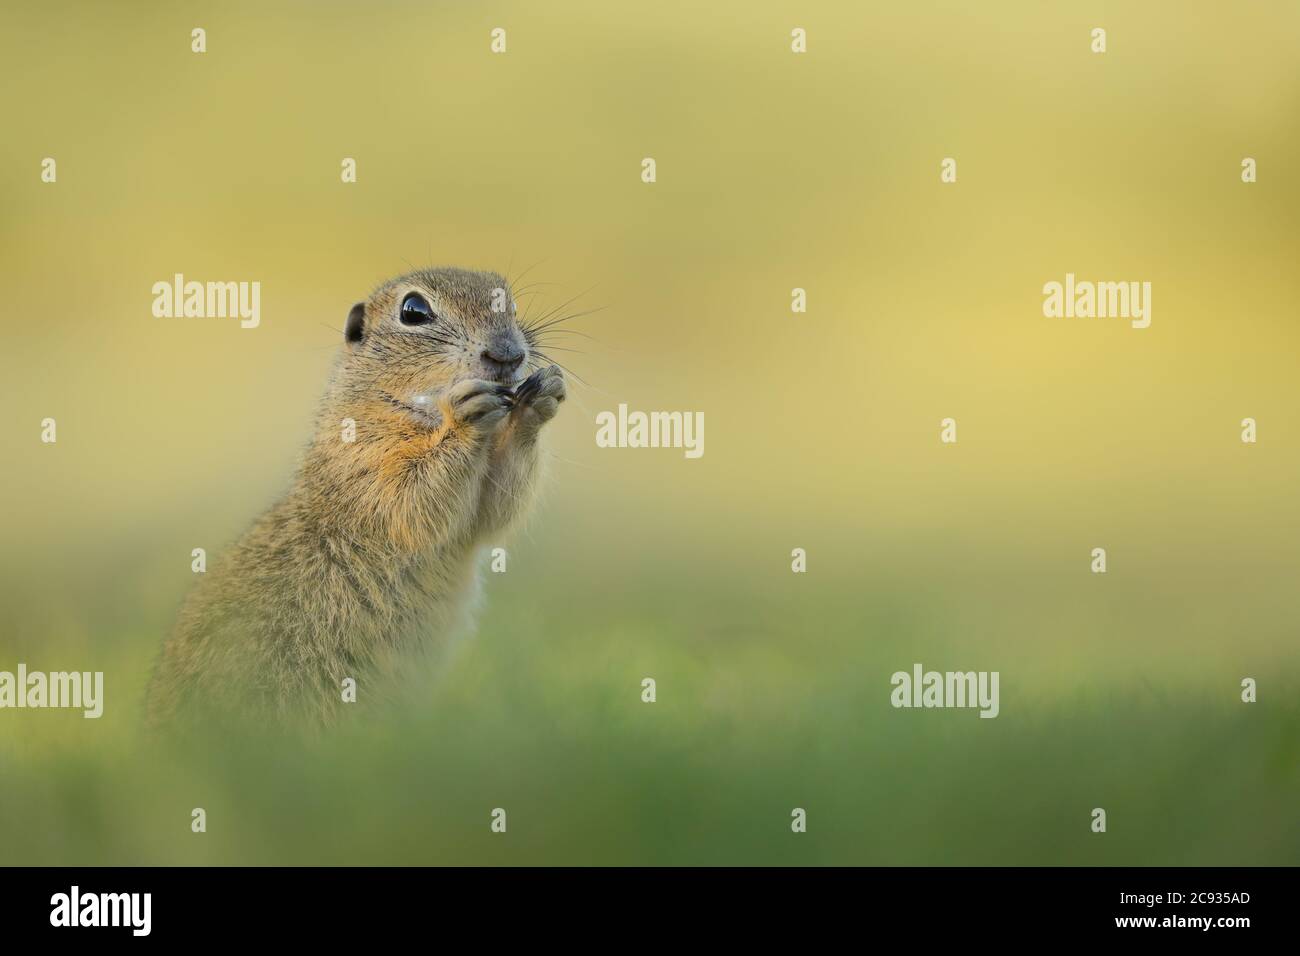 Portrait Ground Squirrel From Wild Nature Little Funny Rodent